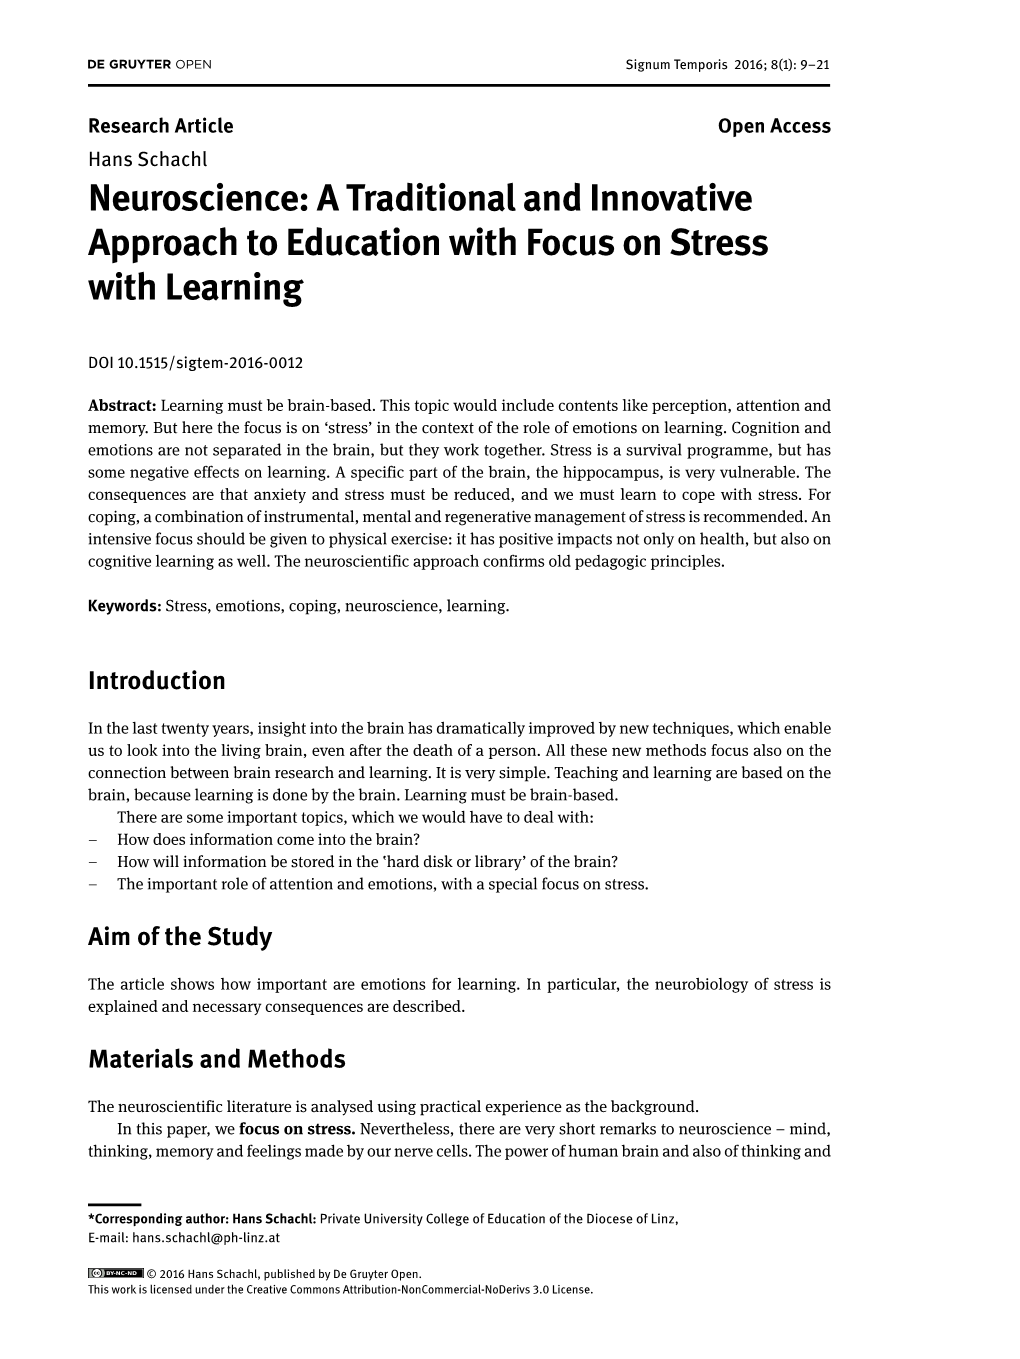 Neuroscience: a Traditional and Innovative Approach to Education with Focus on Stress with Learning